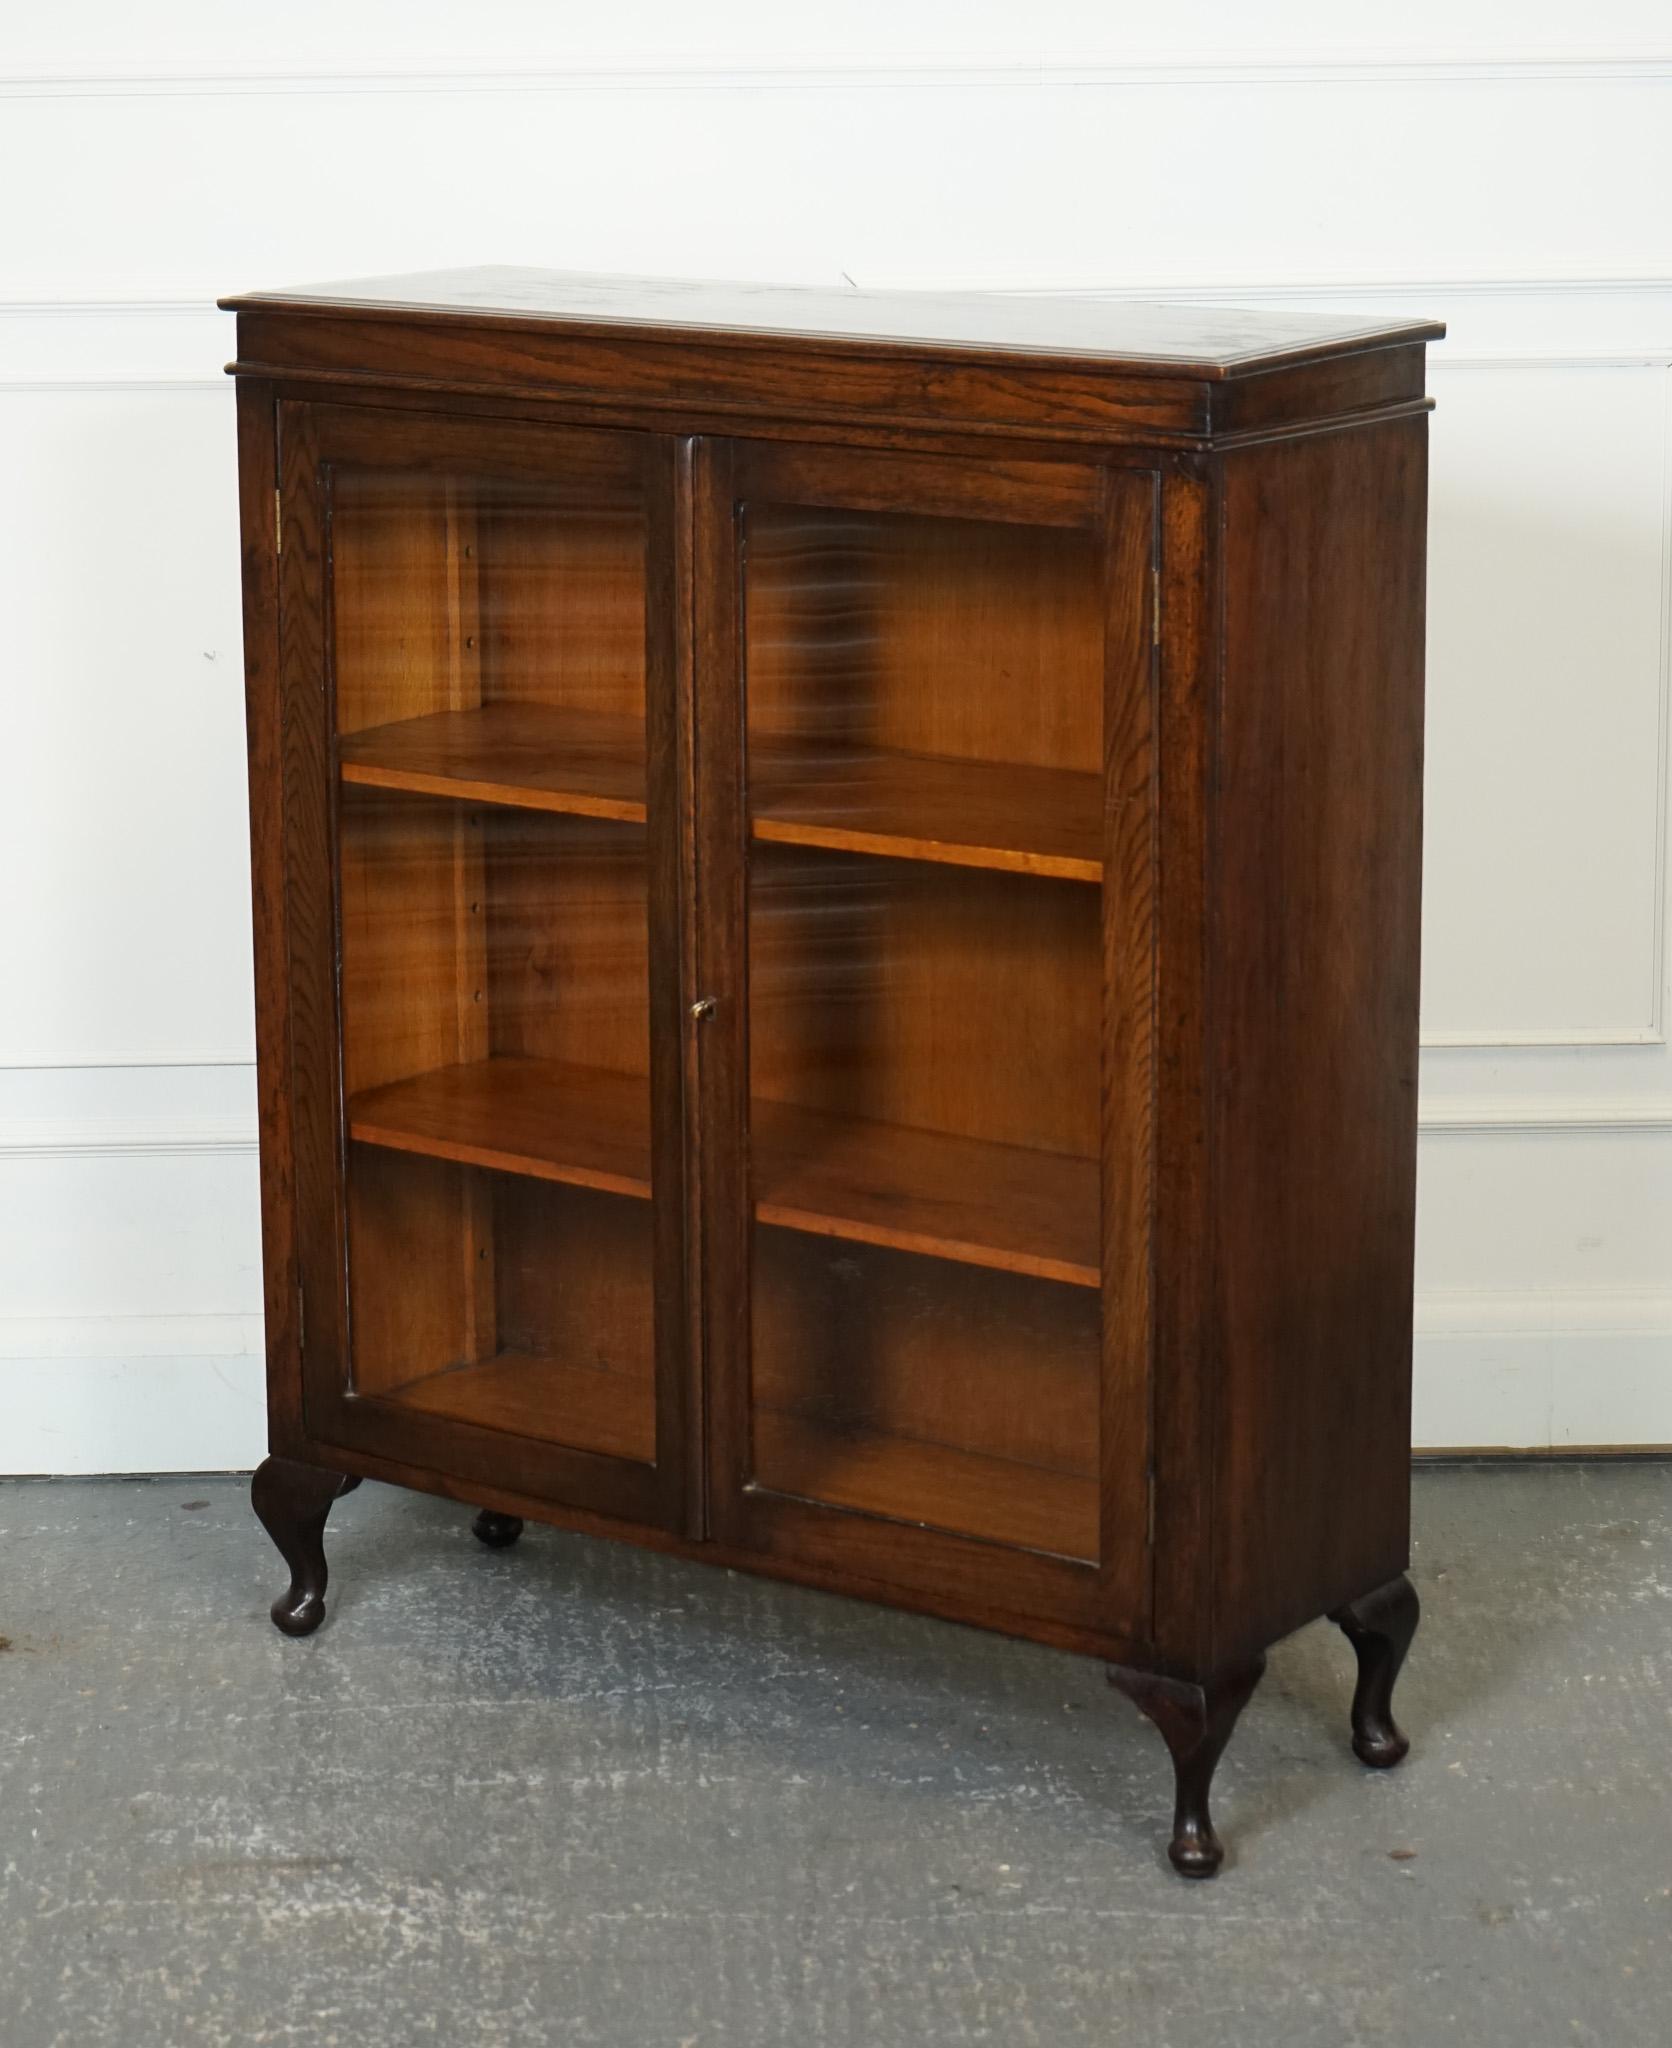 

We are delighted to offer for sale this Lovely Oak Low Bookcase With Glazed Doors.

An oak low bookcase with glazed doors, adjustable shelves, and cabriole legs is a classic and elegant piece of furniture that combines functionality with timeless